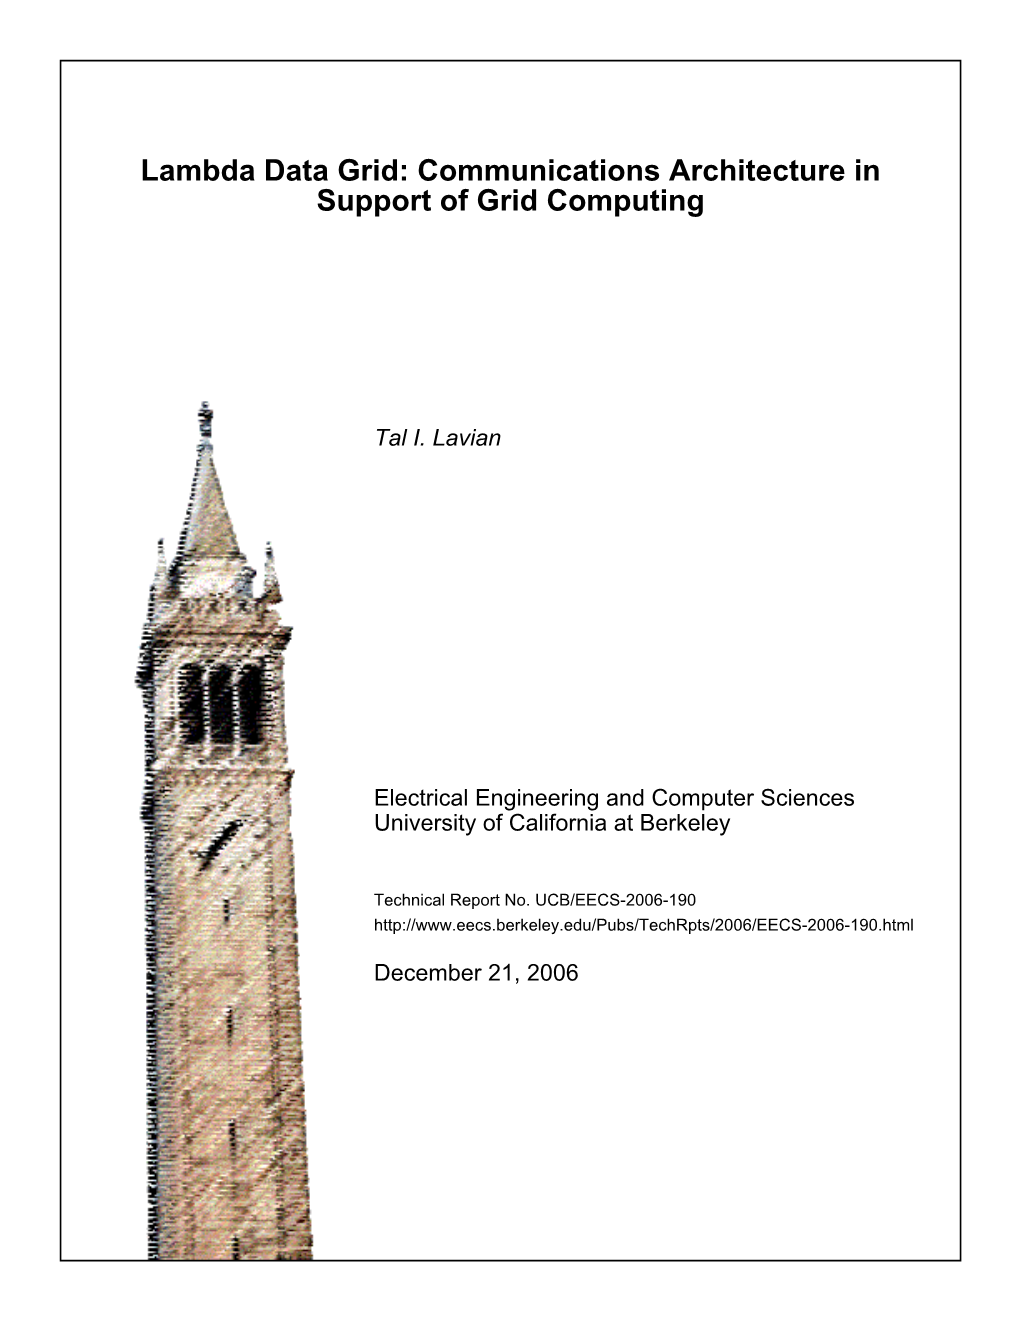 Lambda Data Grid: Communications Architecture in Support of Grid Computing